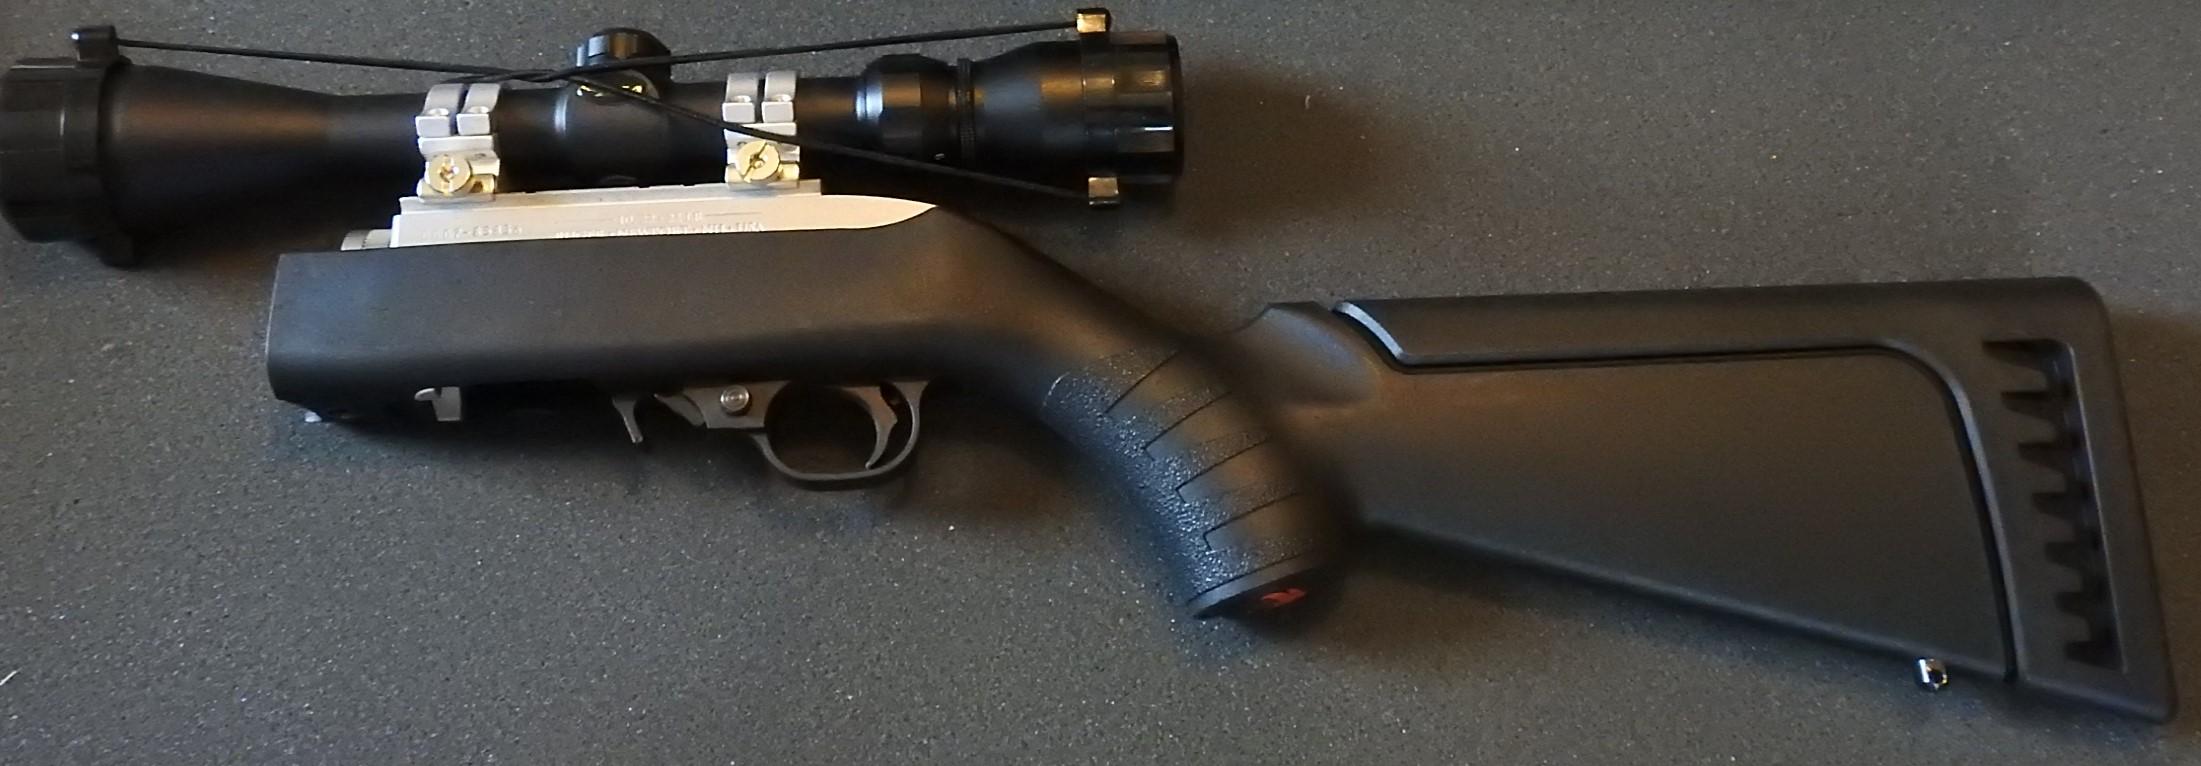 Ruger 22LR Take down with scope 1022